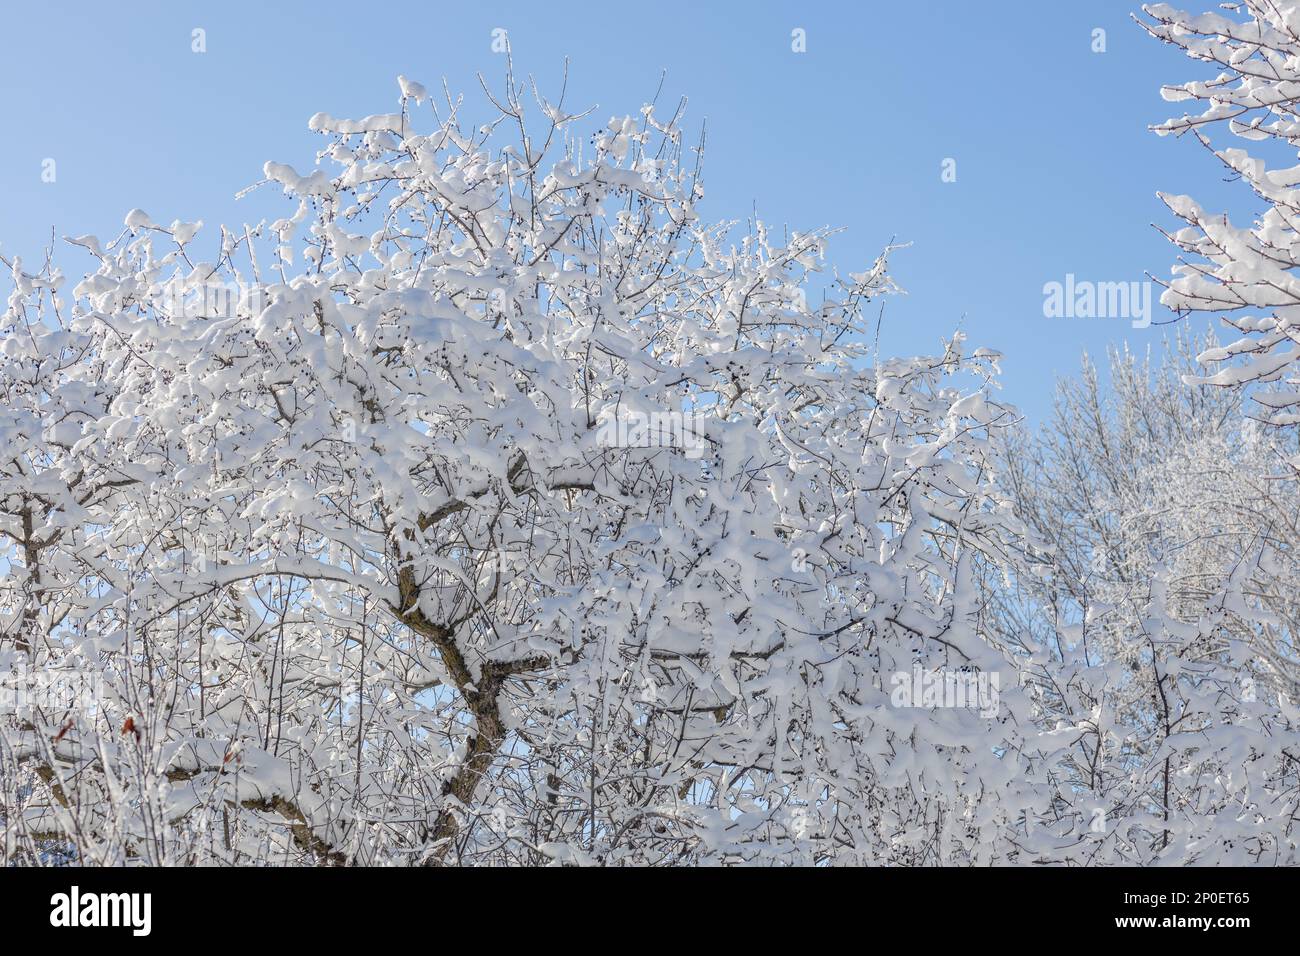 This image shows a close-up abstract texture background of woodland treetop branches covered with heavy snow, against a blue sky background. Stock Photo